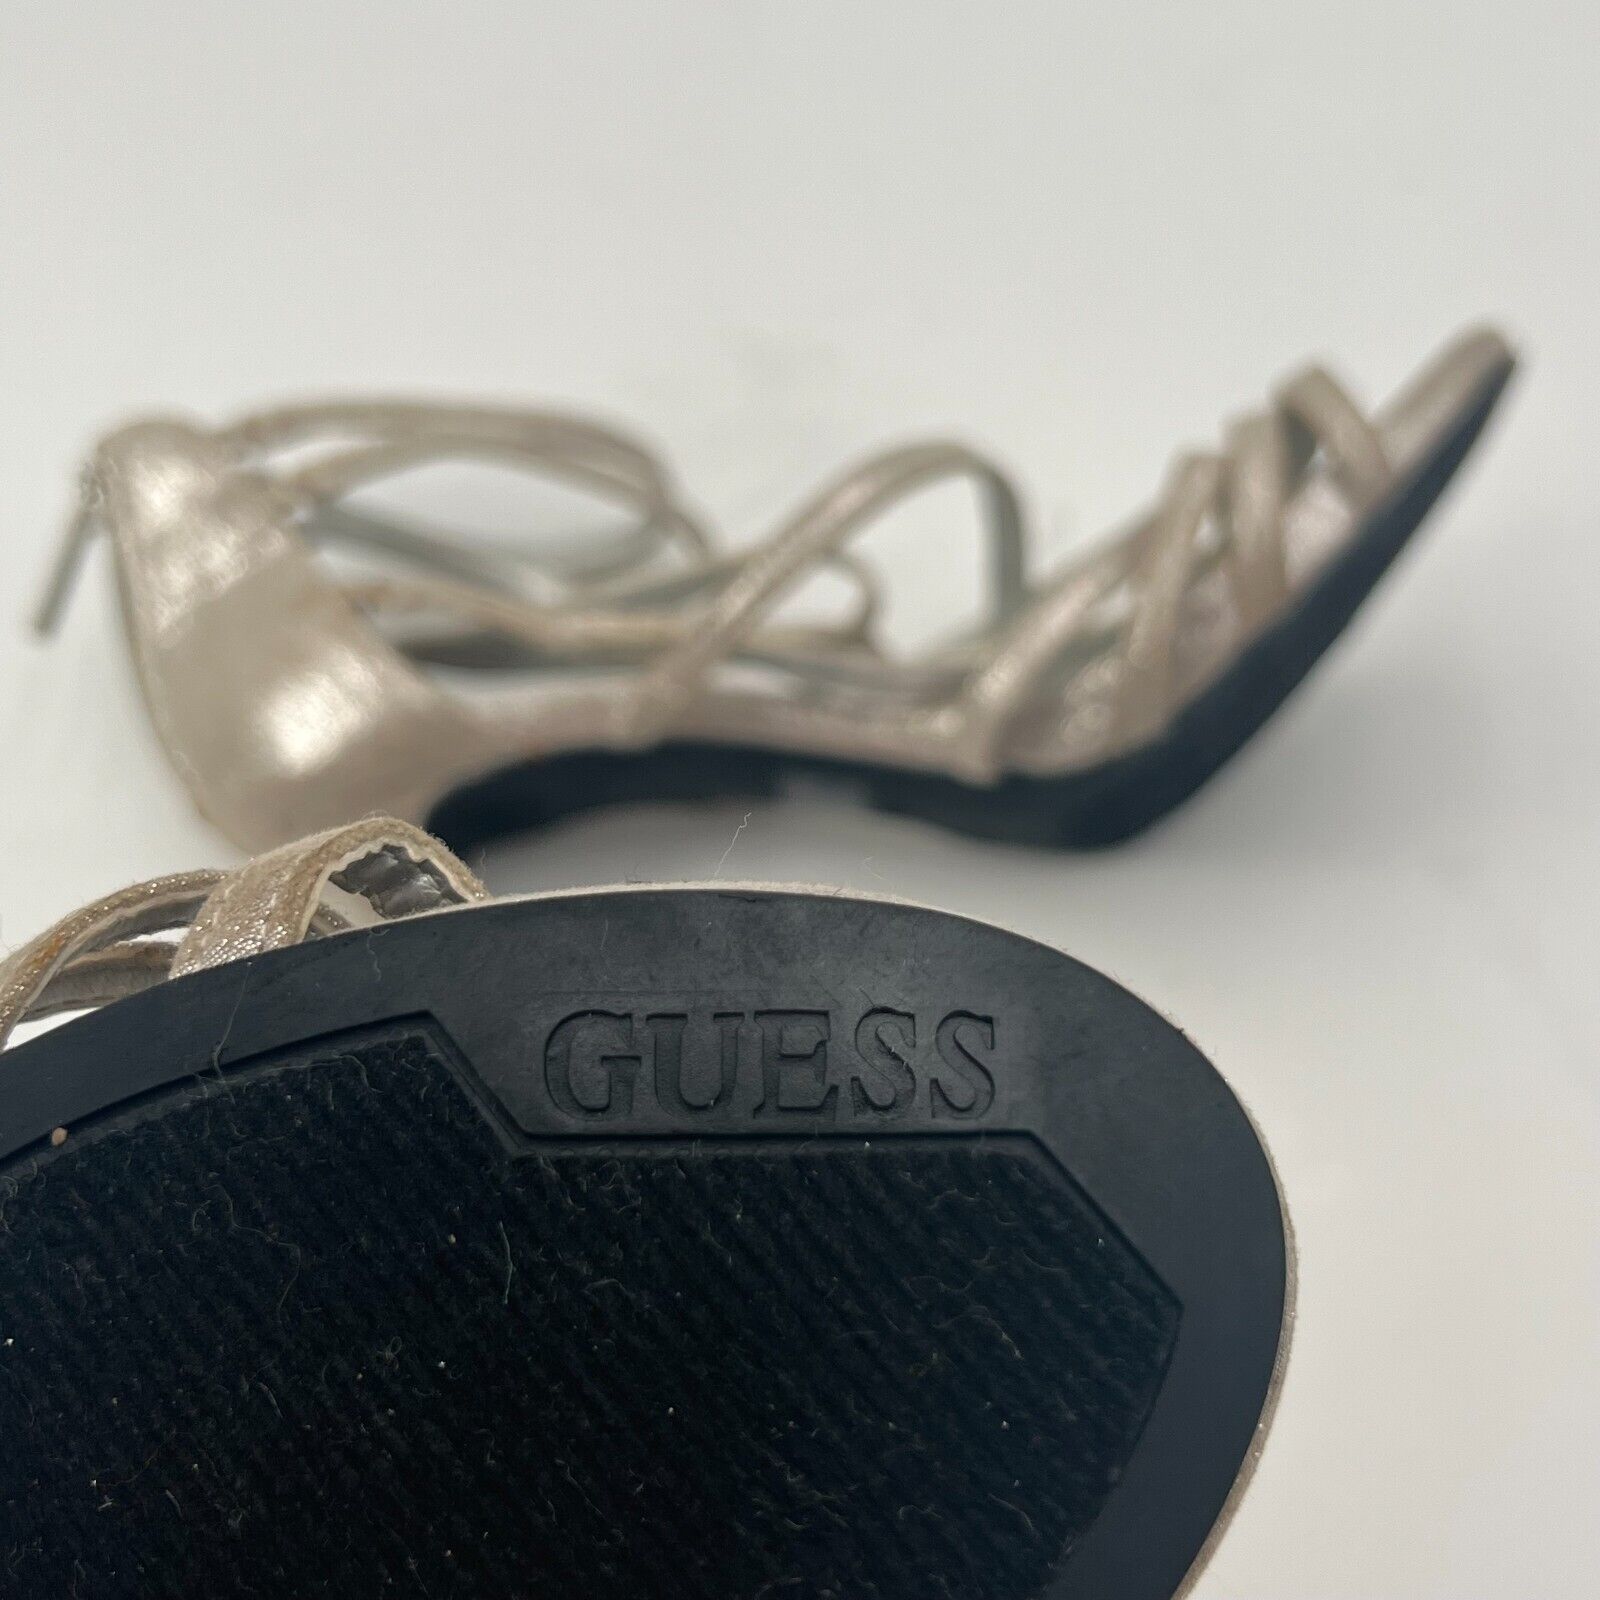 Guess Strappy Dress Sandals 4” Heel Adjustable Buckle Rose Gold Sparkle Womens S